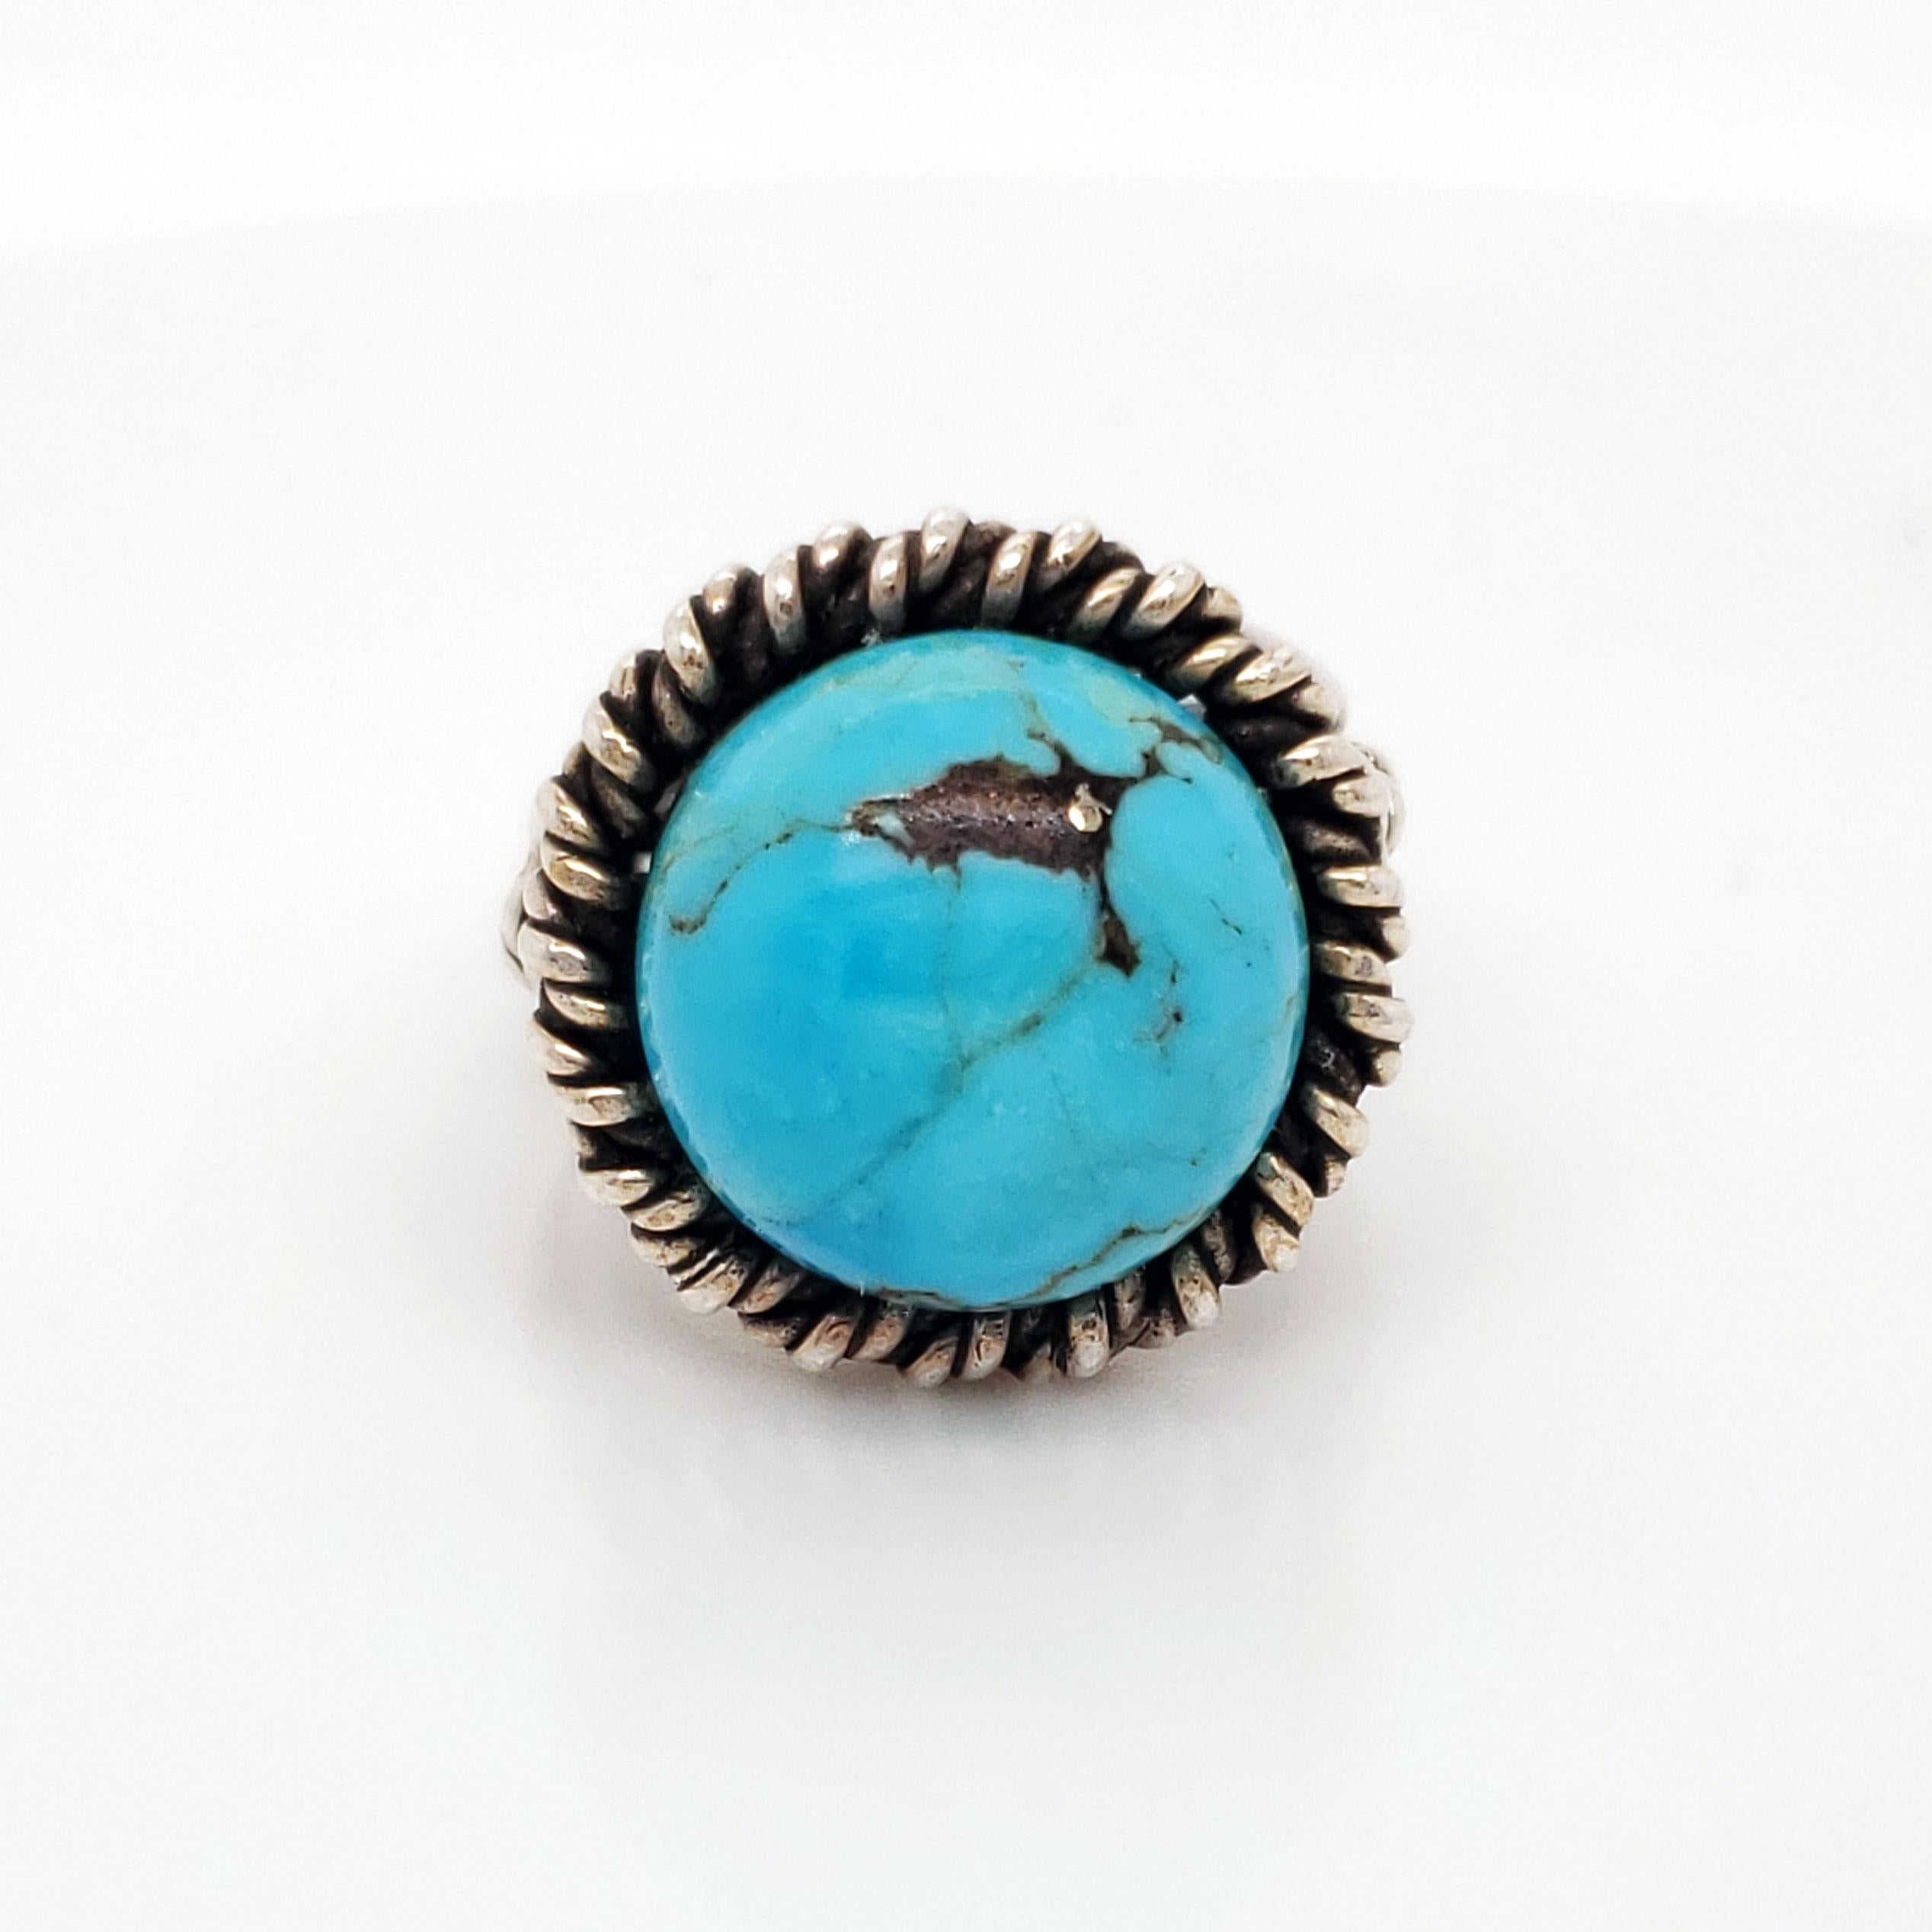 This turquoise ring is stunning! Big and bold, this ring was hand made by Fred Skagg, and it is stamped with his mark and signature on the under-gallery. Dated to the 1960s, this ring features a vibrant turquoise stone and gorgeous twisted silver